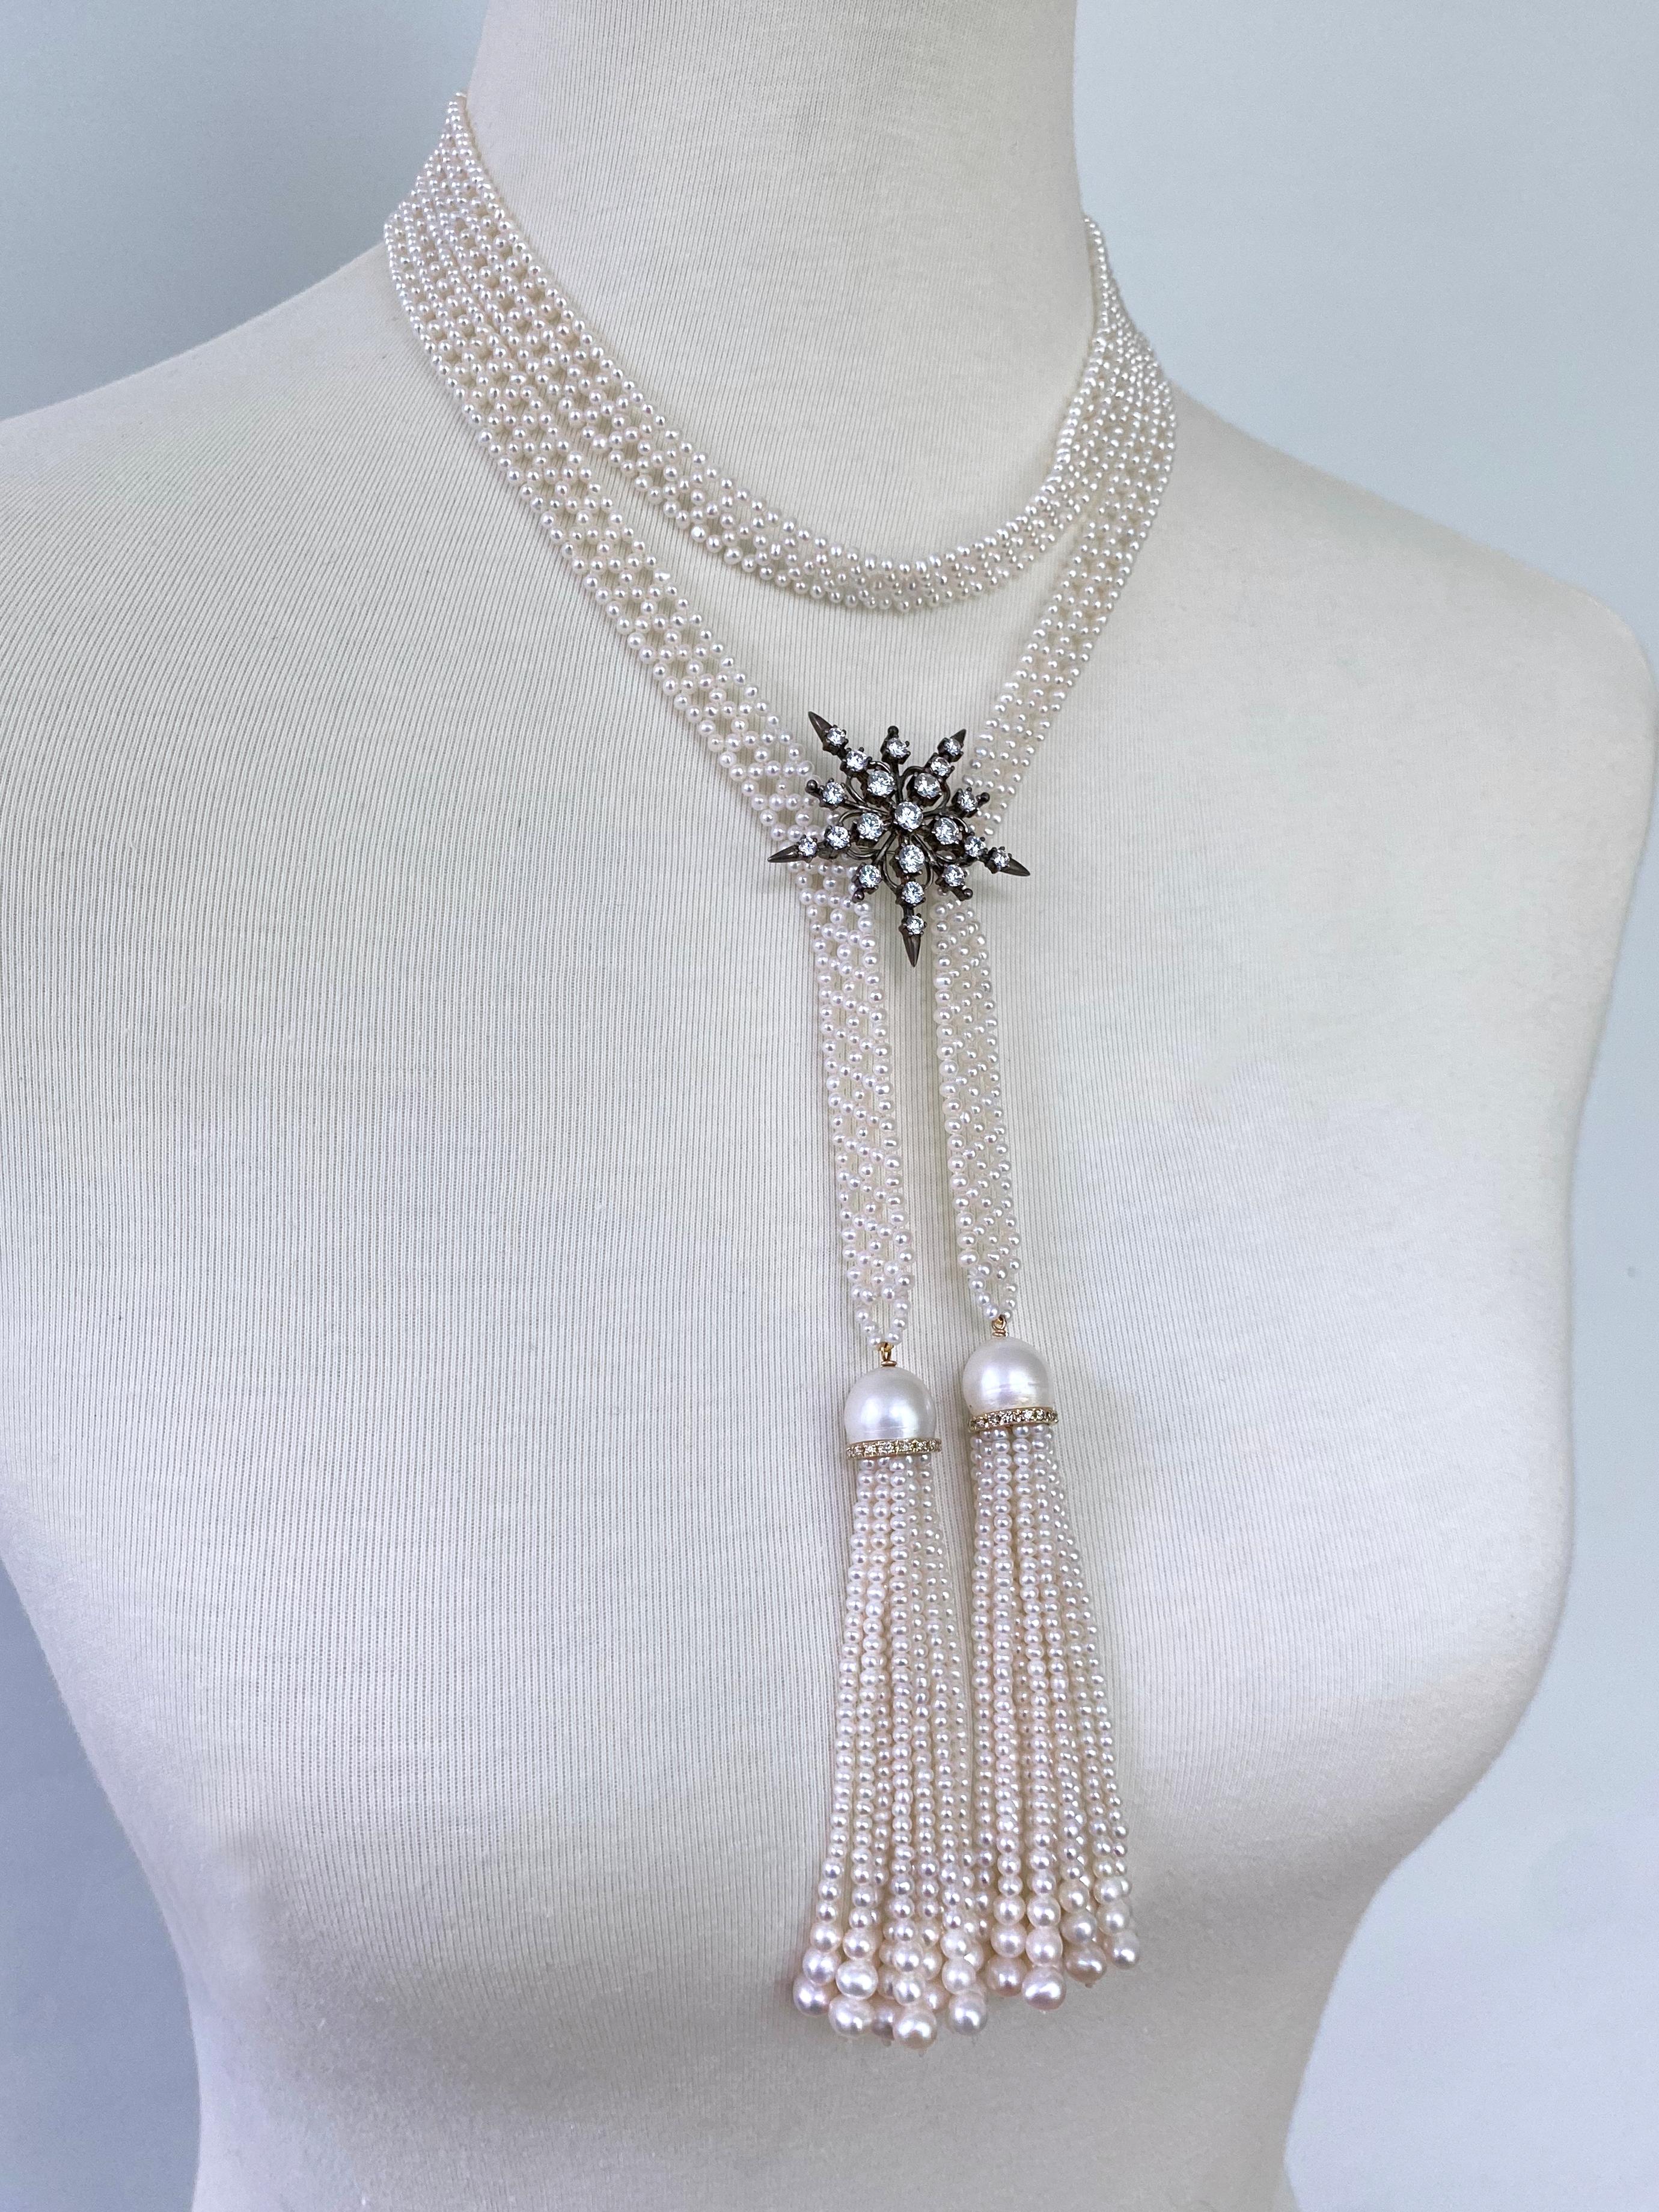 Beautiful and elegant classic Sautoir by Marina J. This Sautoir features perfect seed Pearls all intricately woven together into a fine lace like design. Measuring 42 inches long sans Tassels, this Sautoir's length allows it to be worn in multiple